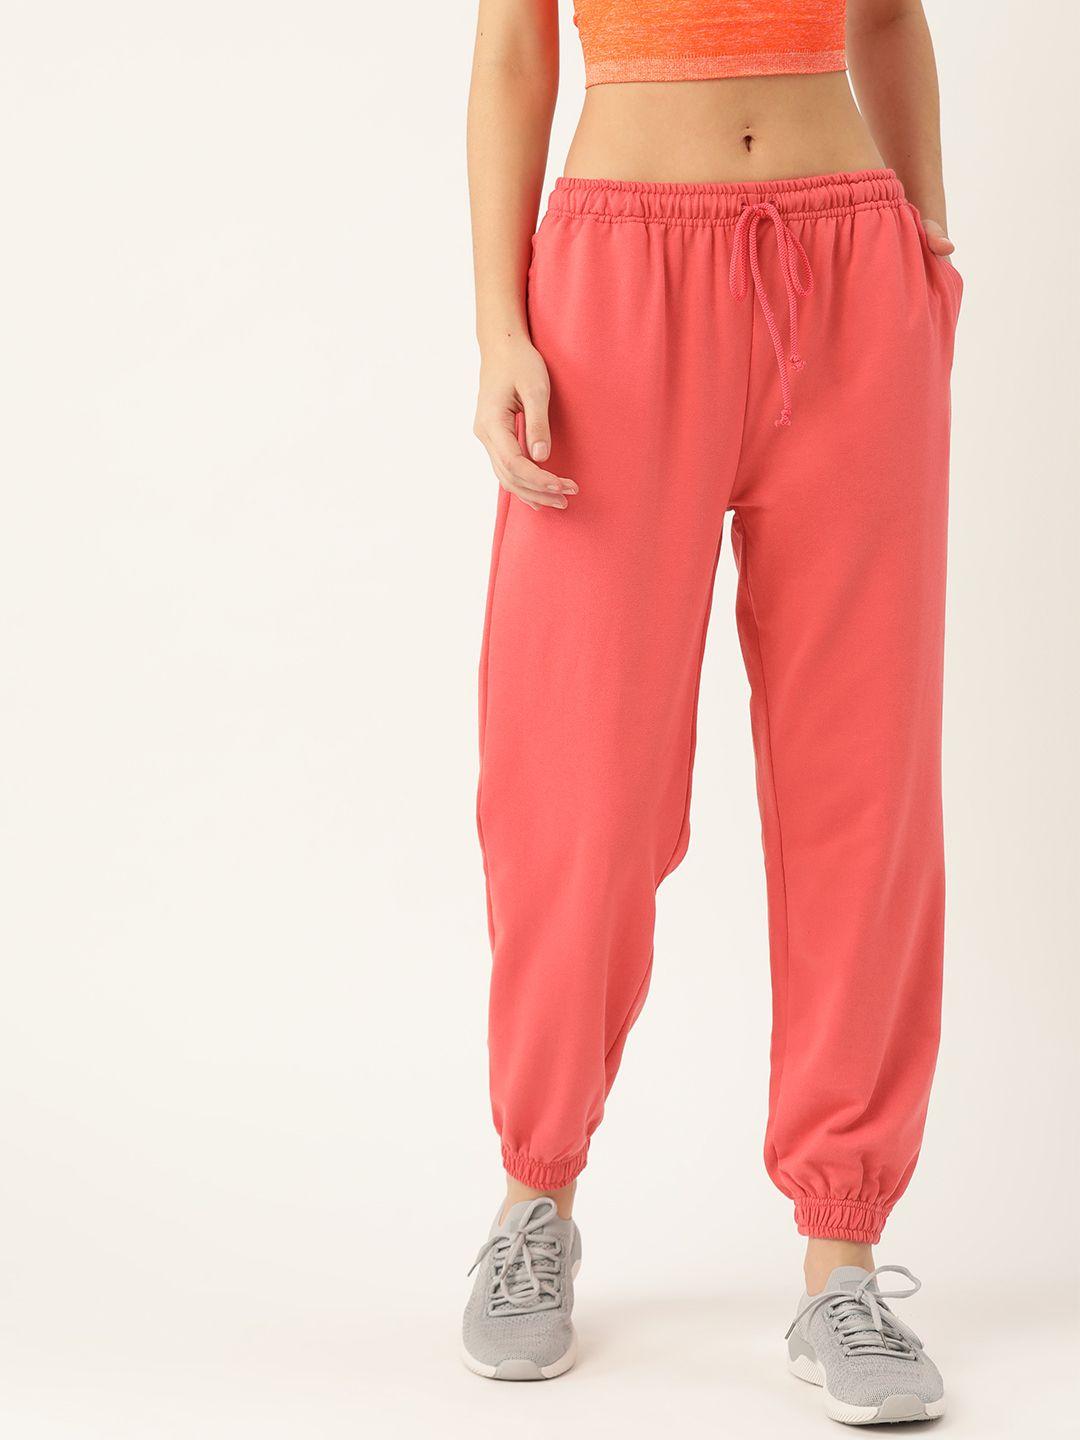 laabha-women-coral-pink-solid-joggers